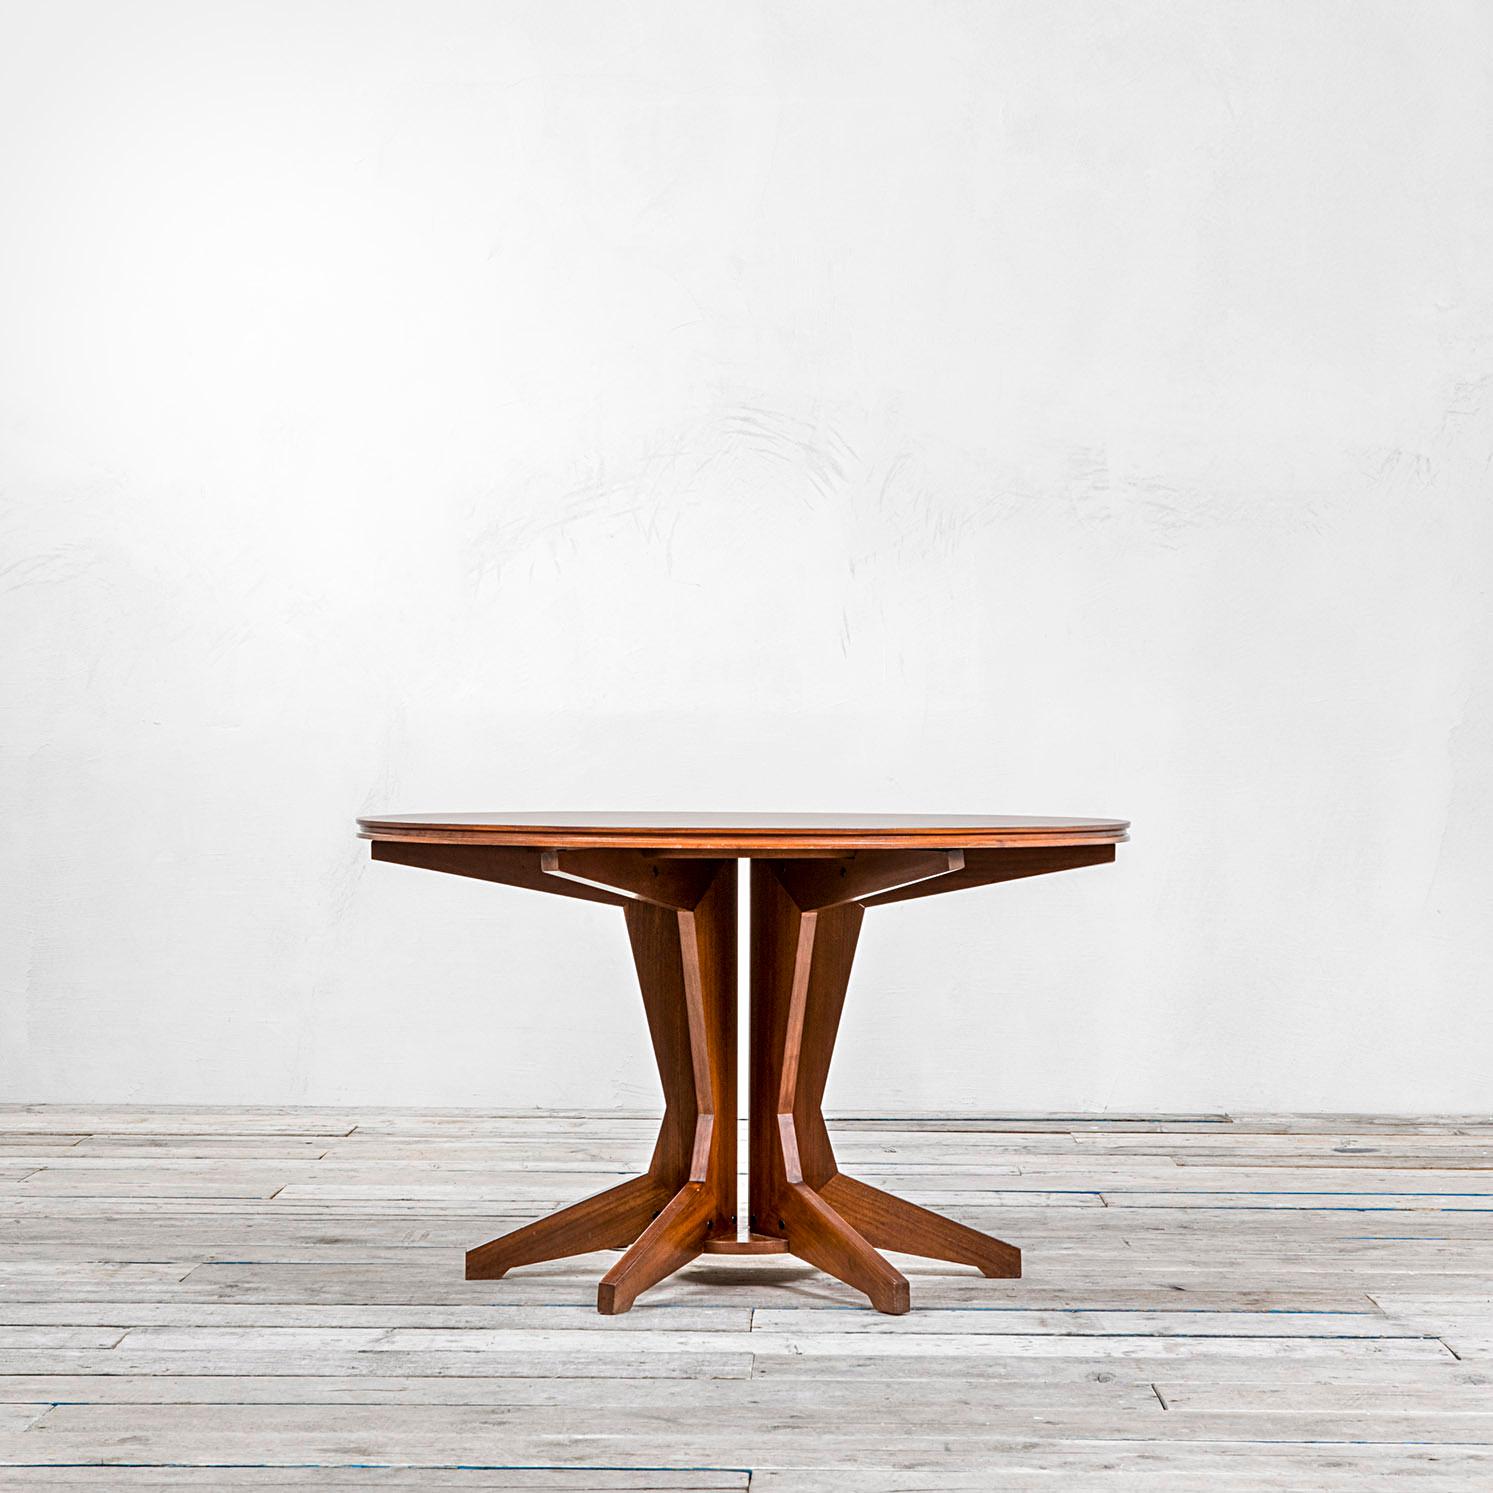 Wooden table with round top and base with radial elements designed by Franco Albini and manufactured for Poggi. 